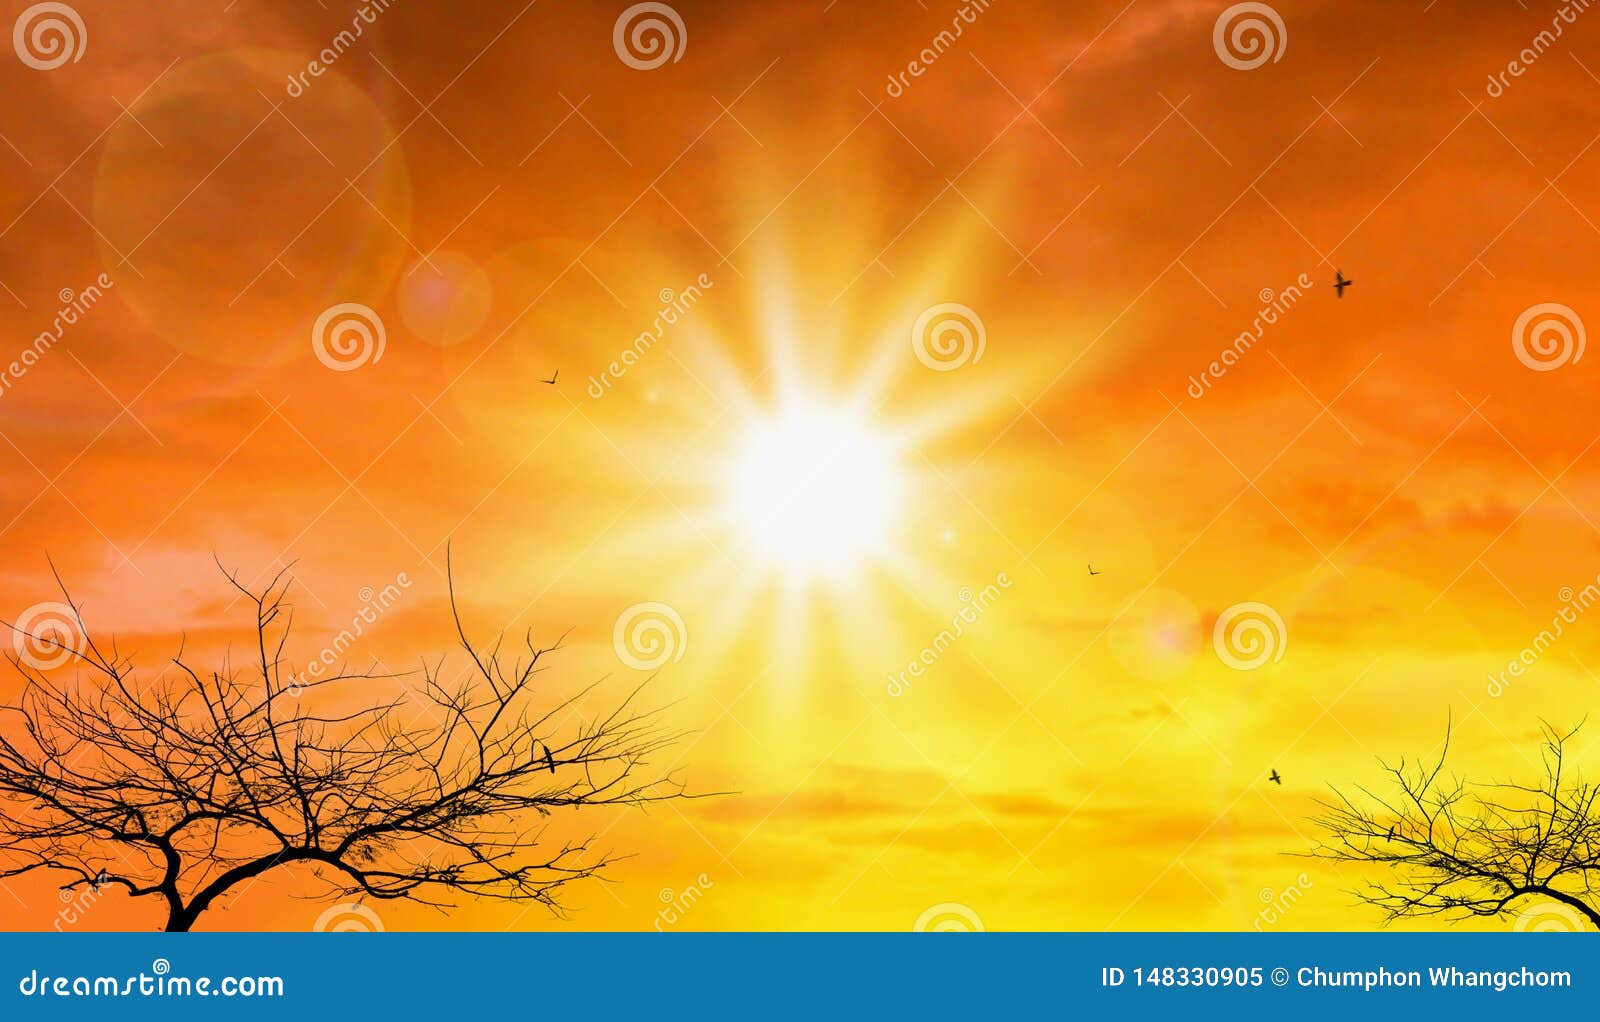 Heat Wave of Extreme Sun and Sky Background. Hot Weather with ...